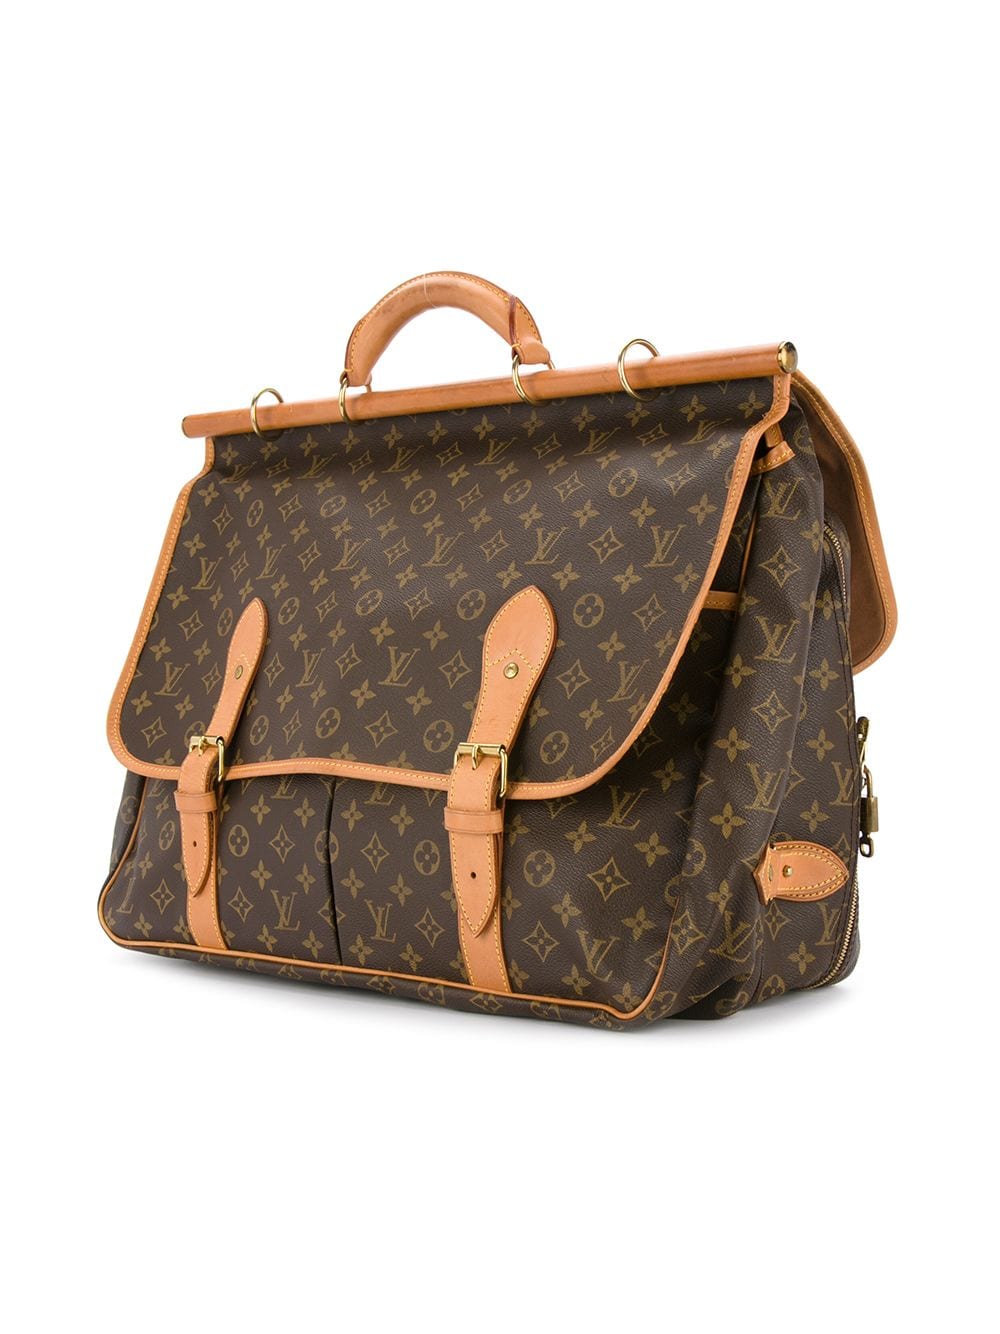 Louis Vuitton Garment Cover Kleber 872068 Monogram Sac Chasse with Strap  Bandouliere Brown Coated Canvas Weekend/Travel Bag, Louis Vuitton